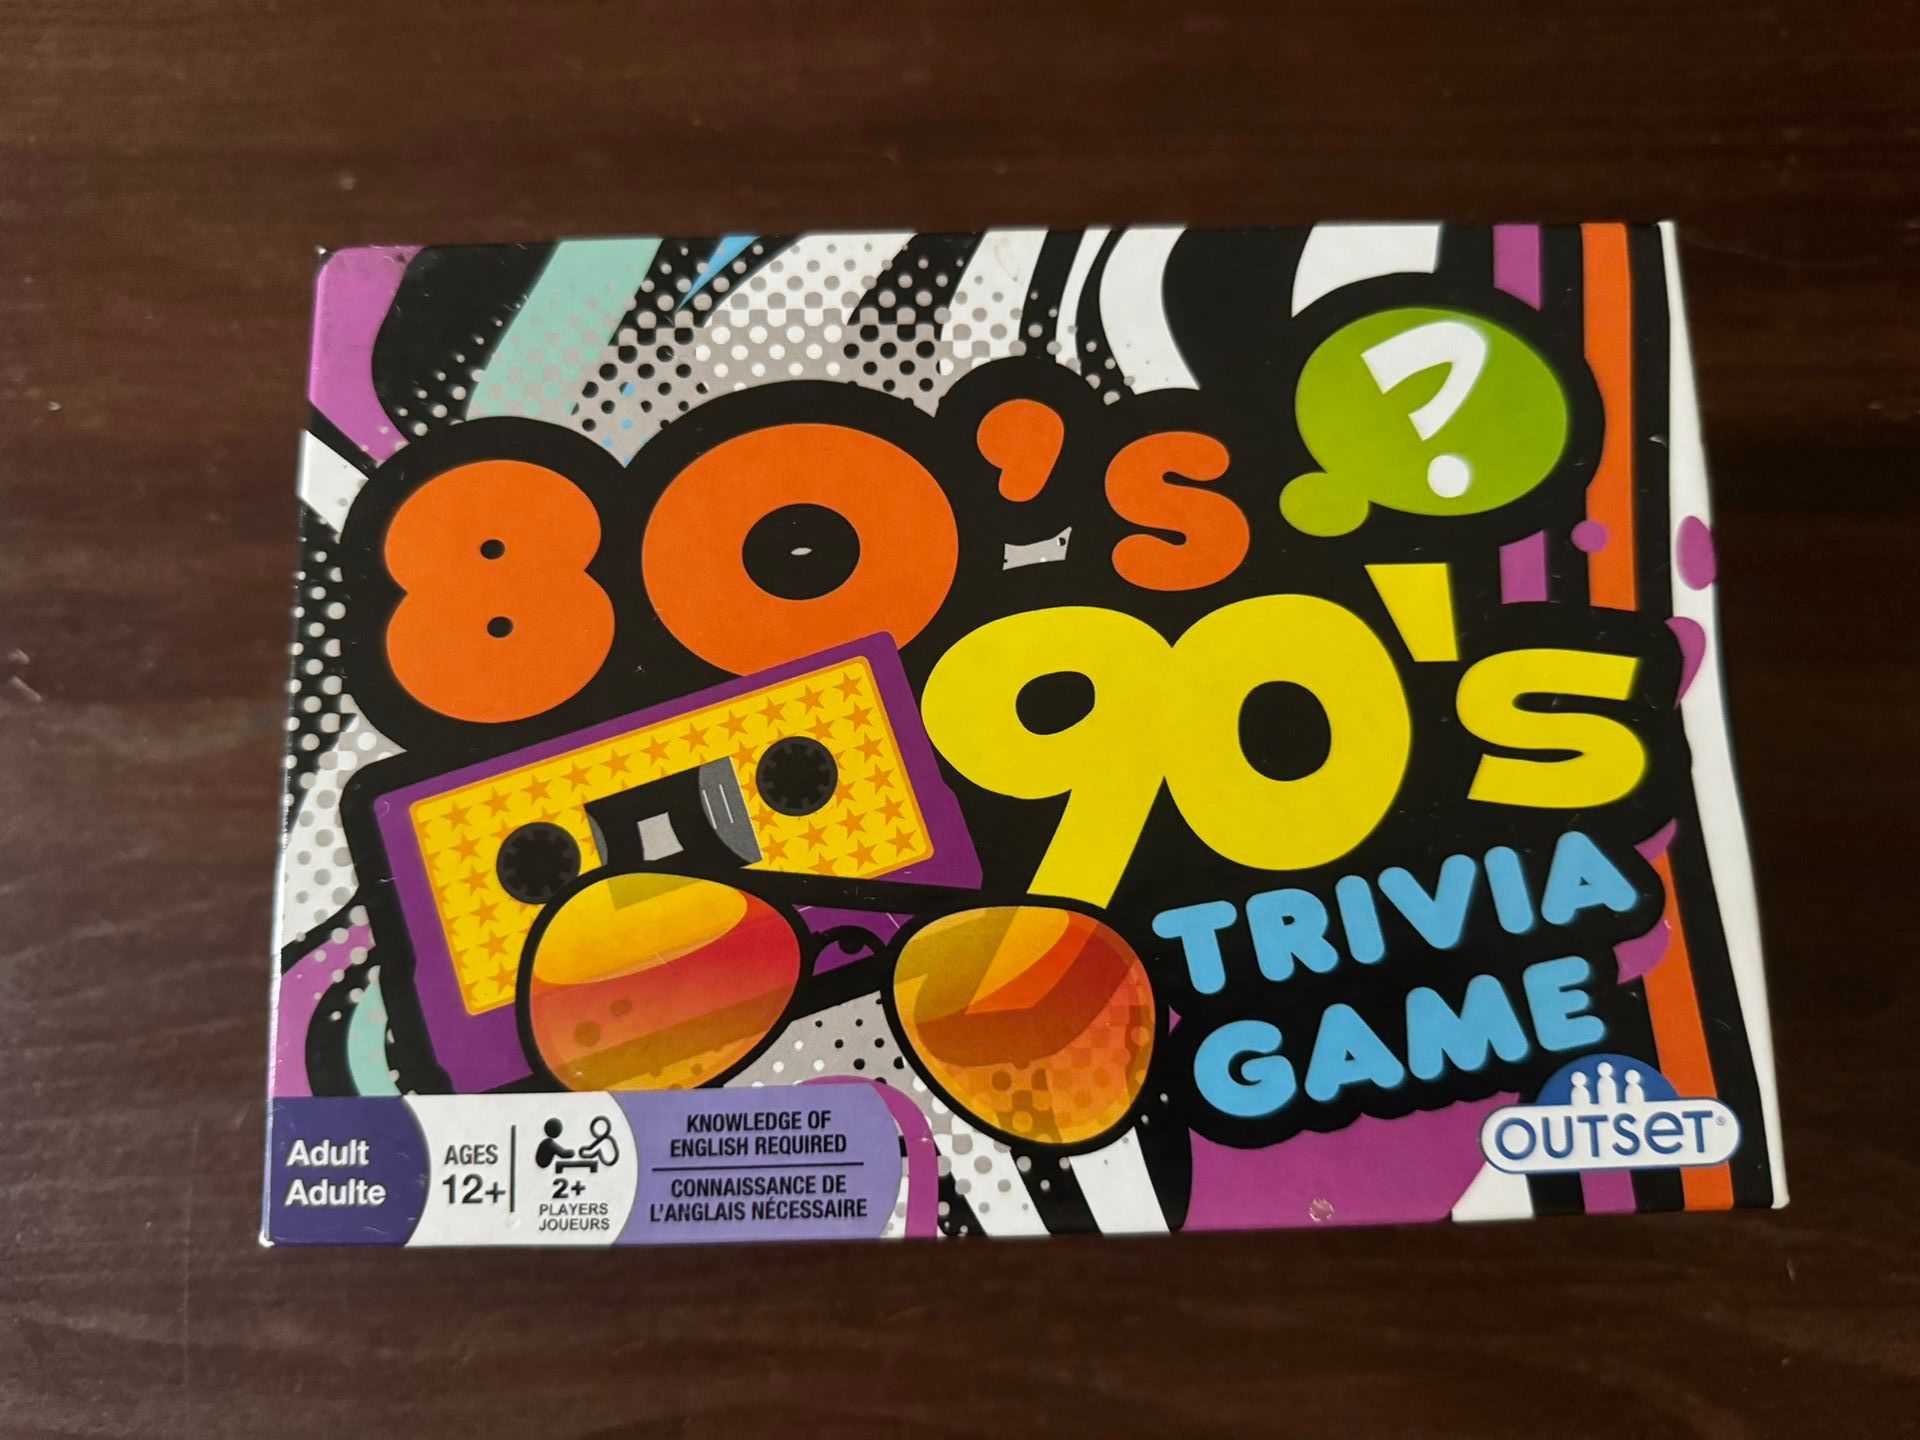 80s 90s Trivia Game